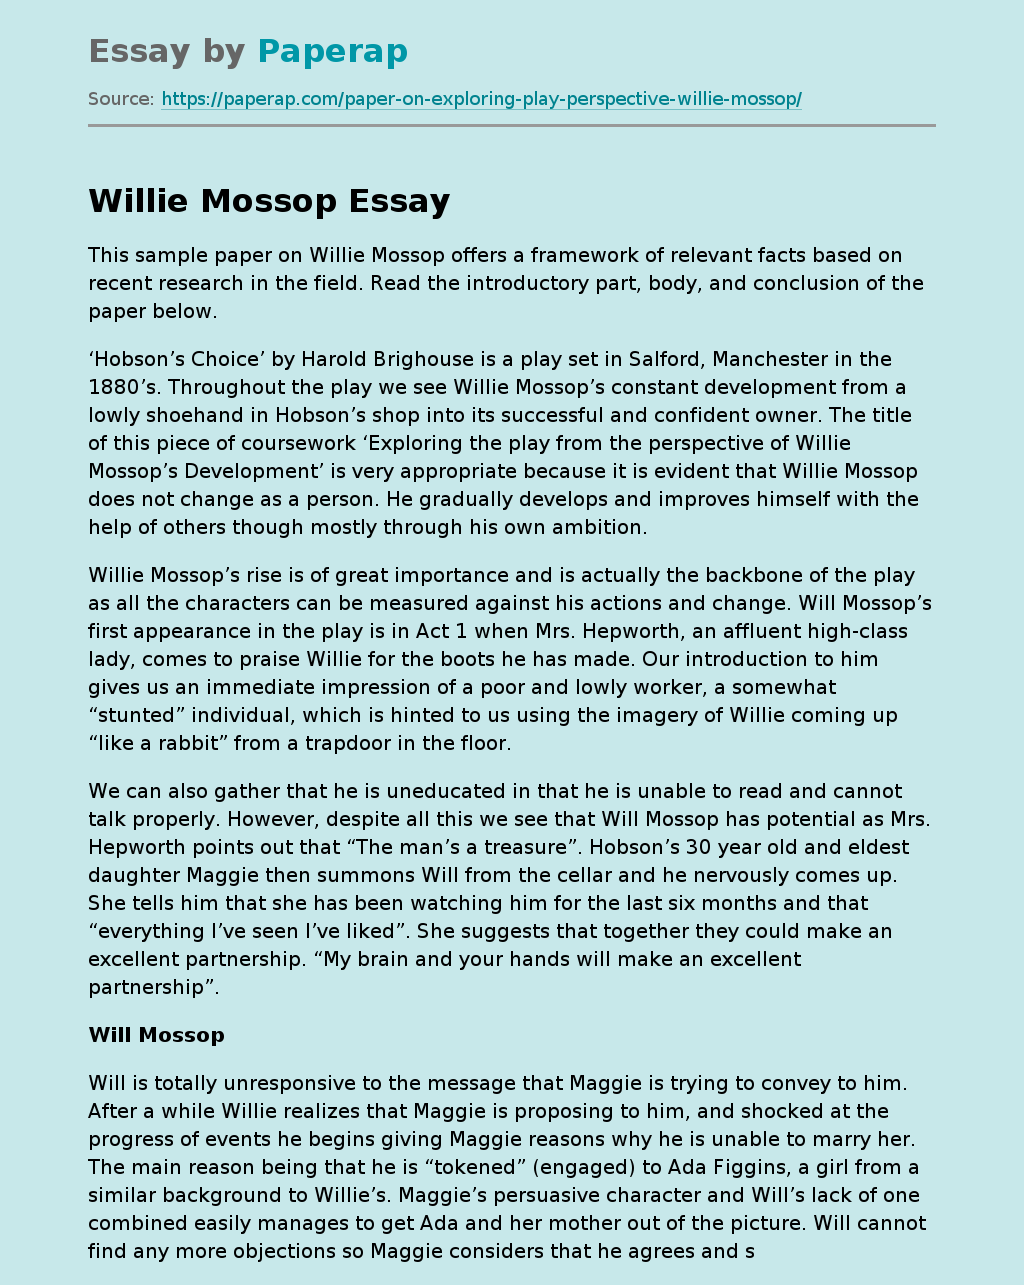 Analyzing Willie Mossop: Recent Research Findings